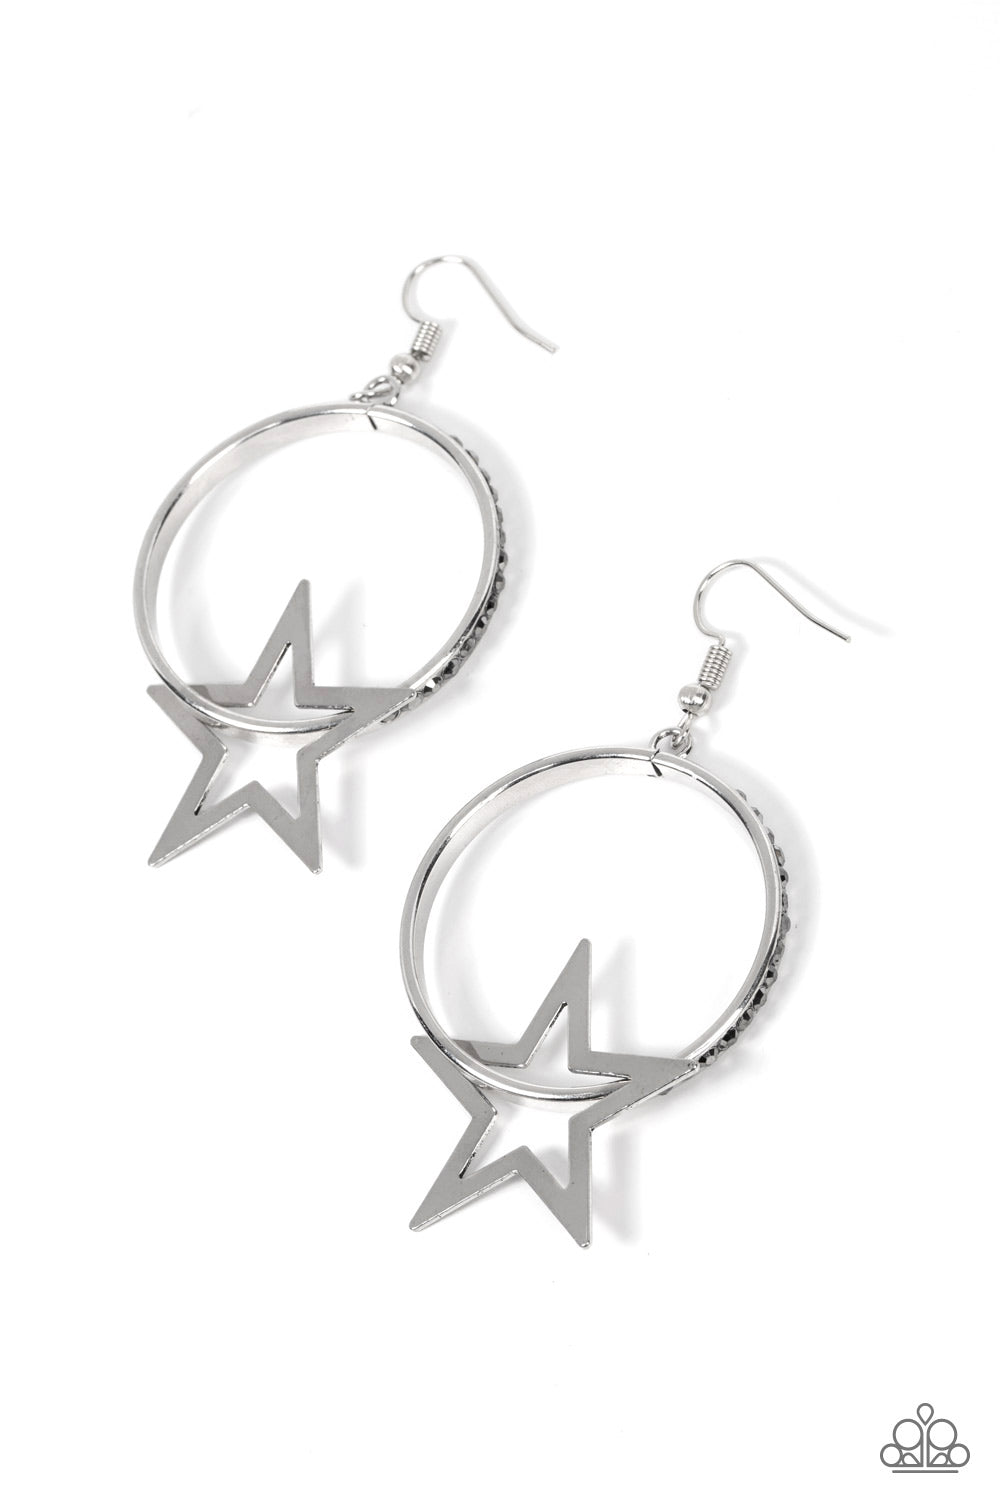 Superstar Showcase Silver Earring - Paparazzi Accessories  A flat silver star glides along a silver hoop, resulting in a stellar fashion. The front of the silver hoop is encrusted in smoky hematite rhinestones for a glitzy finish. Earring attaches to a standard fishhook fitting.  Sold as one pair of earrings.